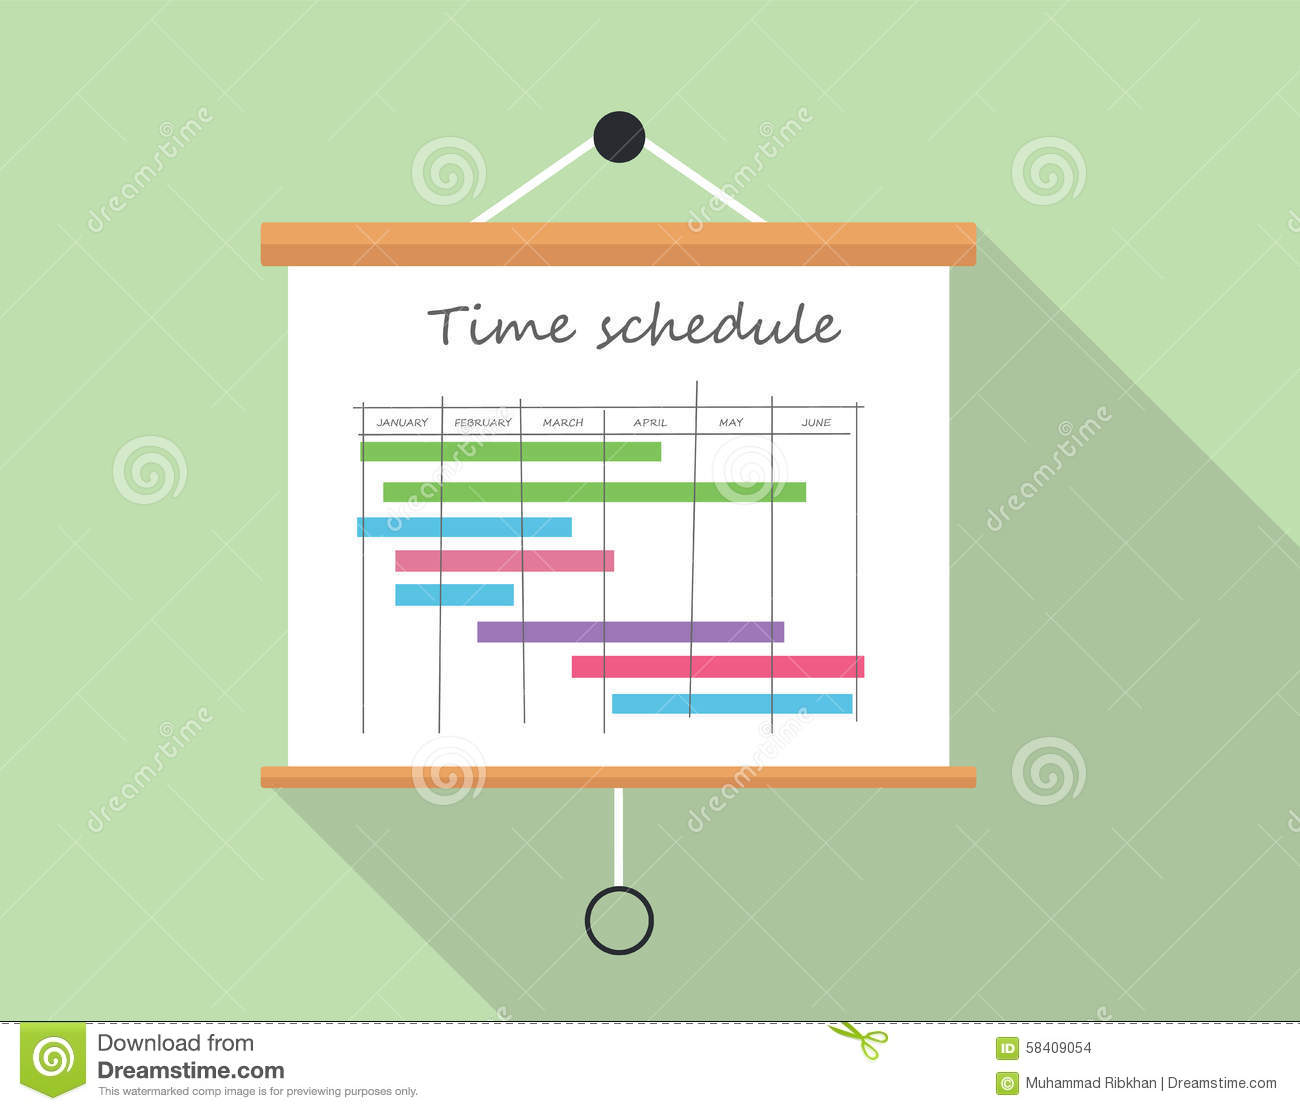 Project Time Schedlue With Presentation Board Illustration Board